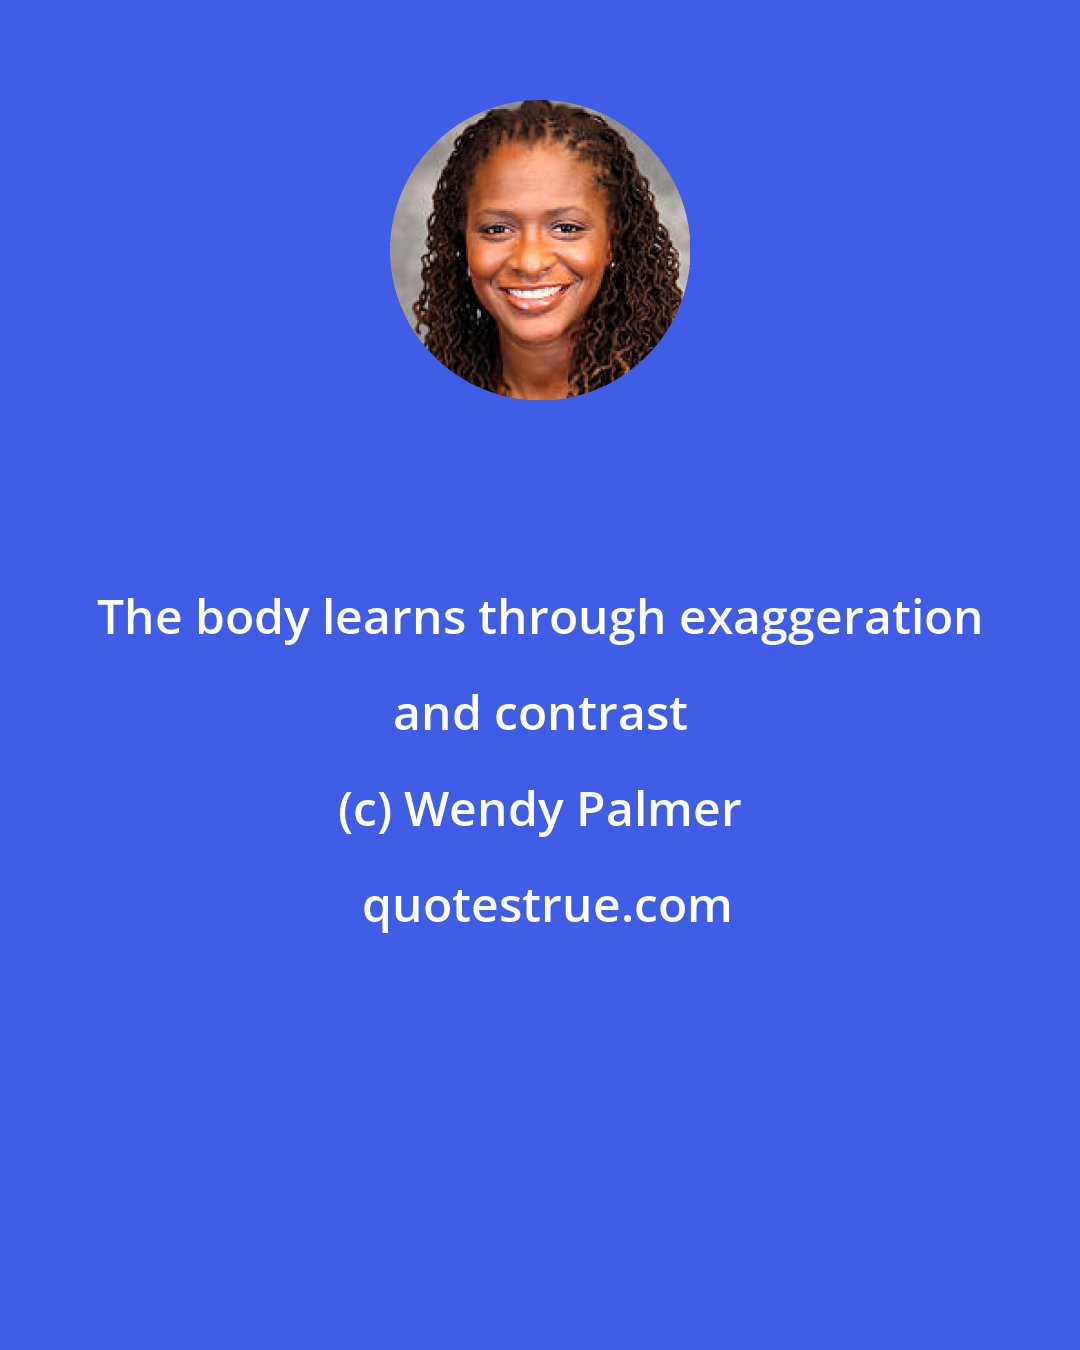 Wendy Palmer: The body learns through exaggeration and contrast